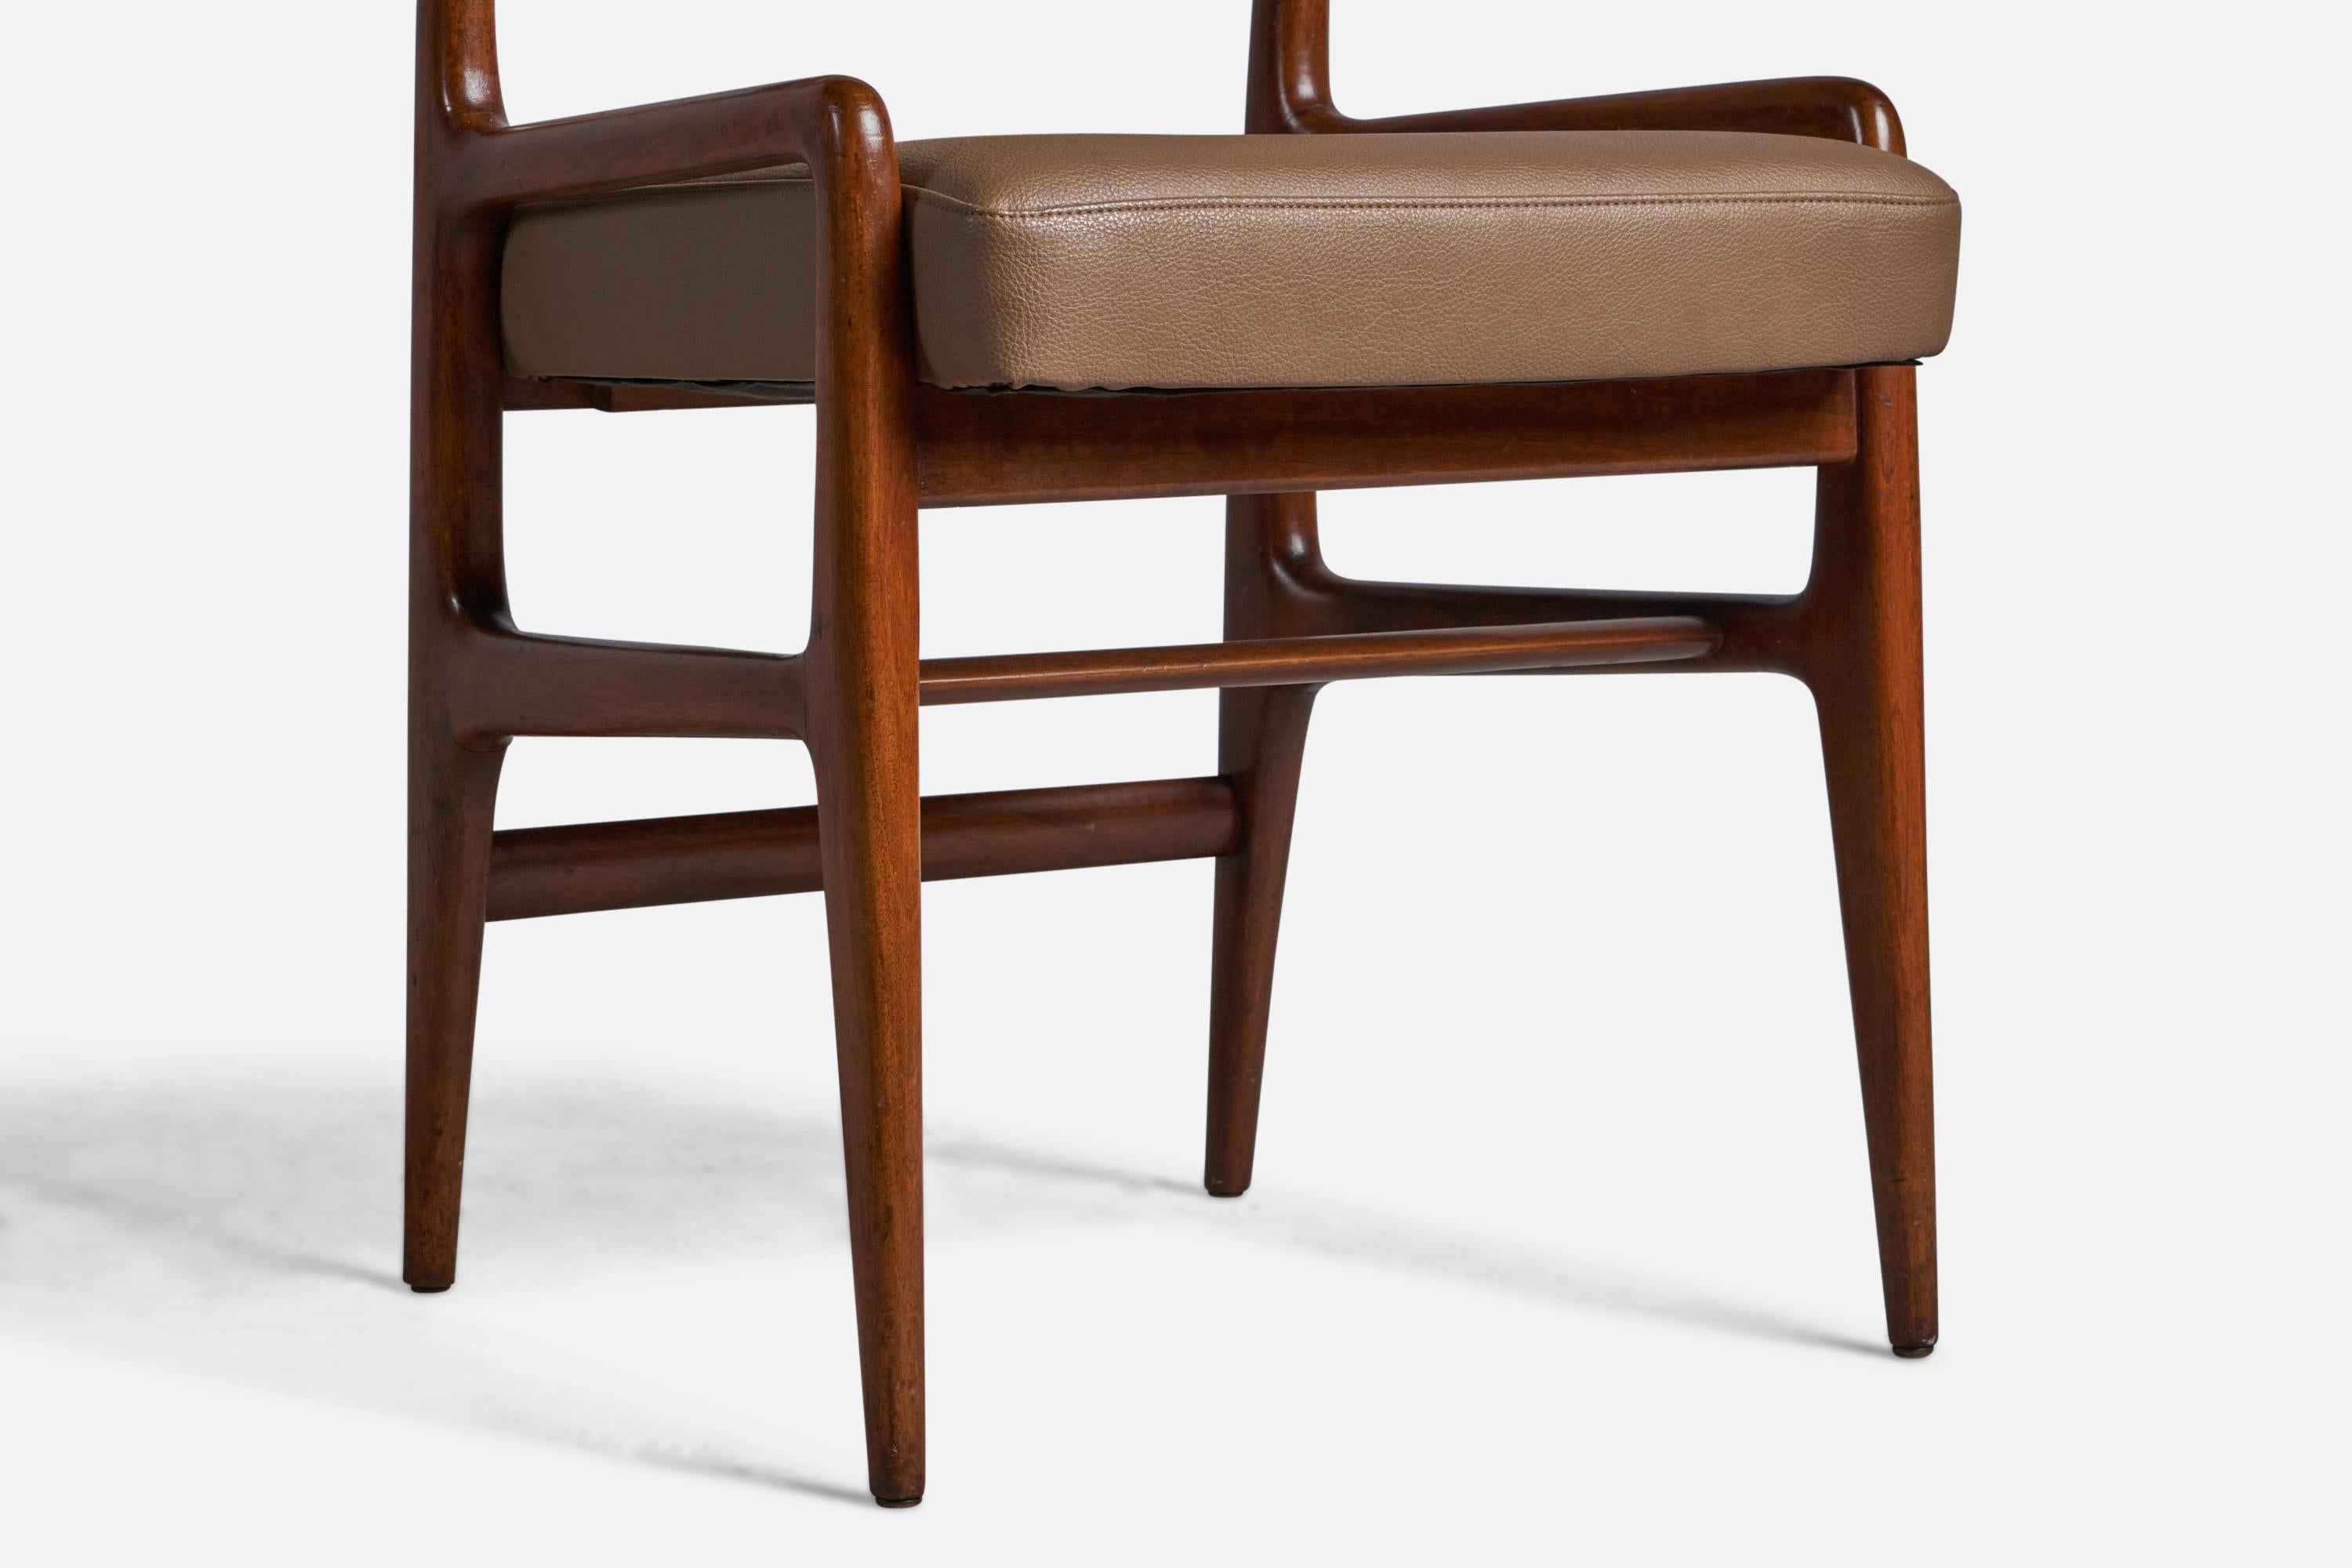 Mid-20th Century Gio Ponti, Dining Chair, Walnut, Leather, Italy, 1960s